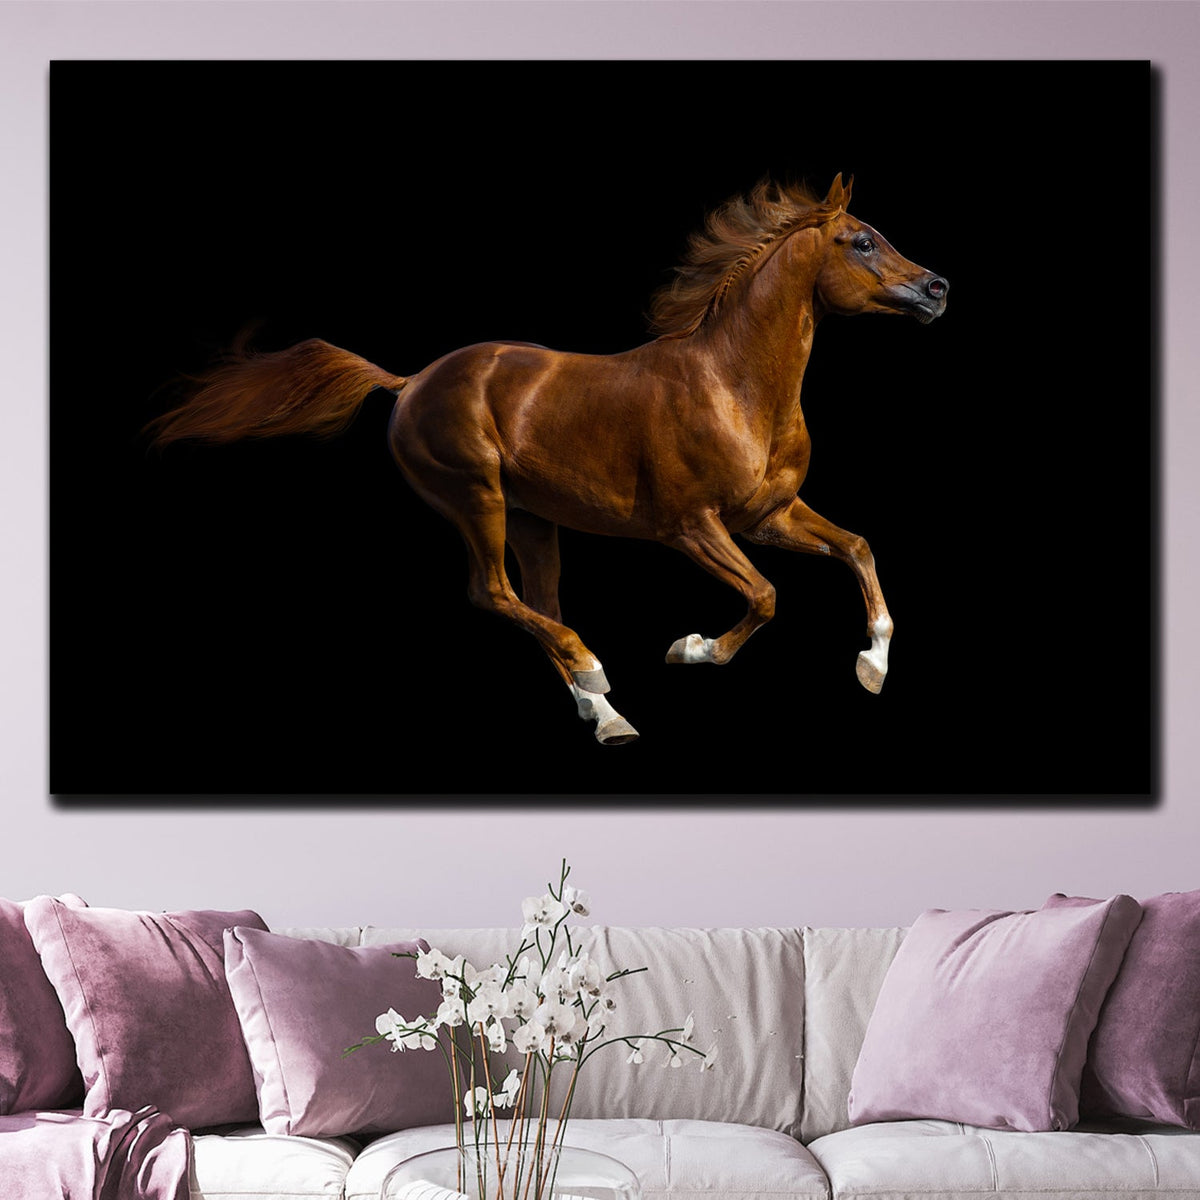 https://cdn.shopify.com/s/files/1/0387/9986/8044/products/ChestnutHorseCanvasArtprintStretched-1.jpg